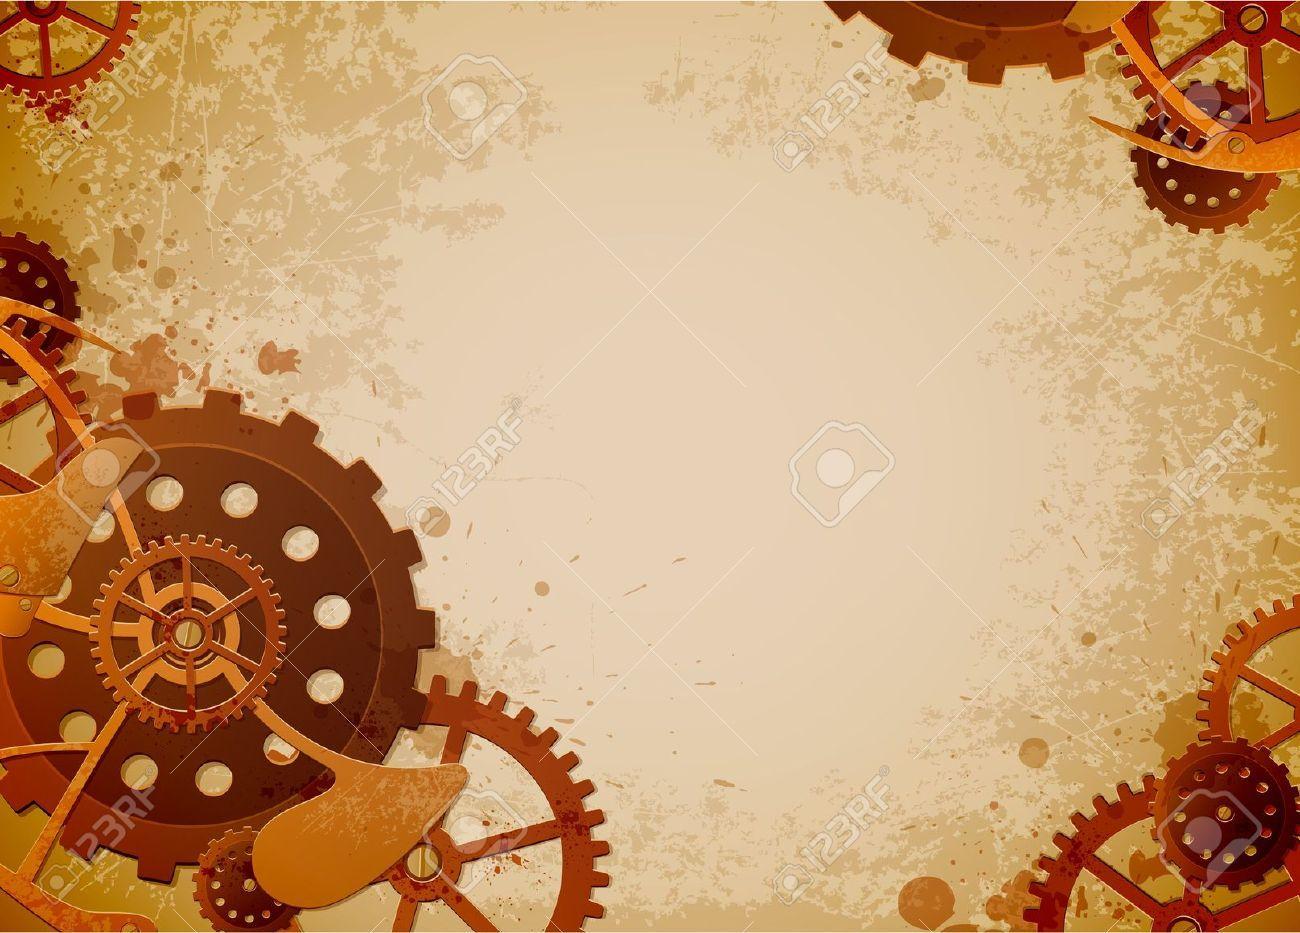 Steampunk Stock Illustrations, Clipart And Royalty Free Steampunk